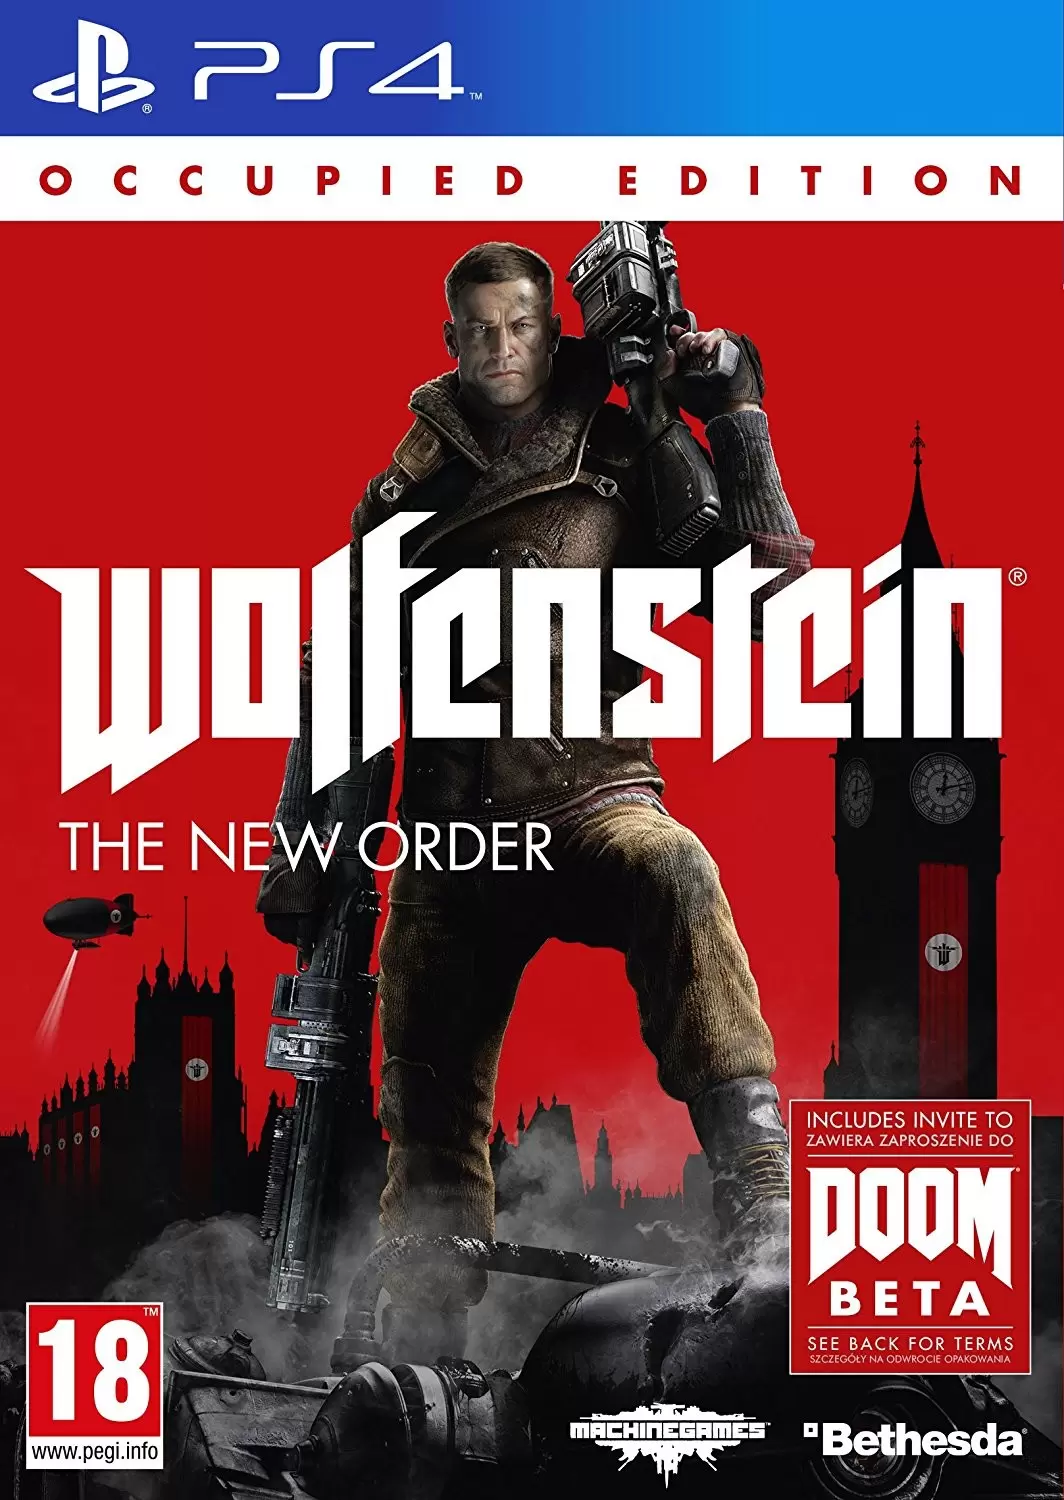 Jeux PS4 - Wolfenstein The New Order - Occupied Edition